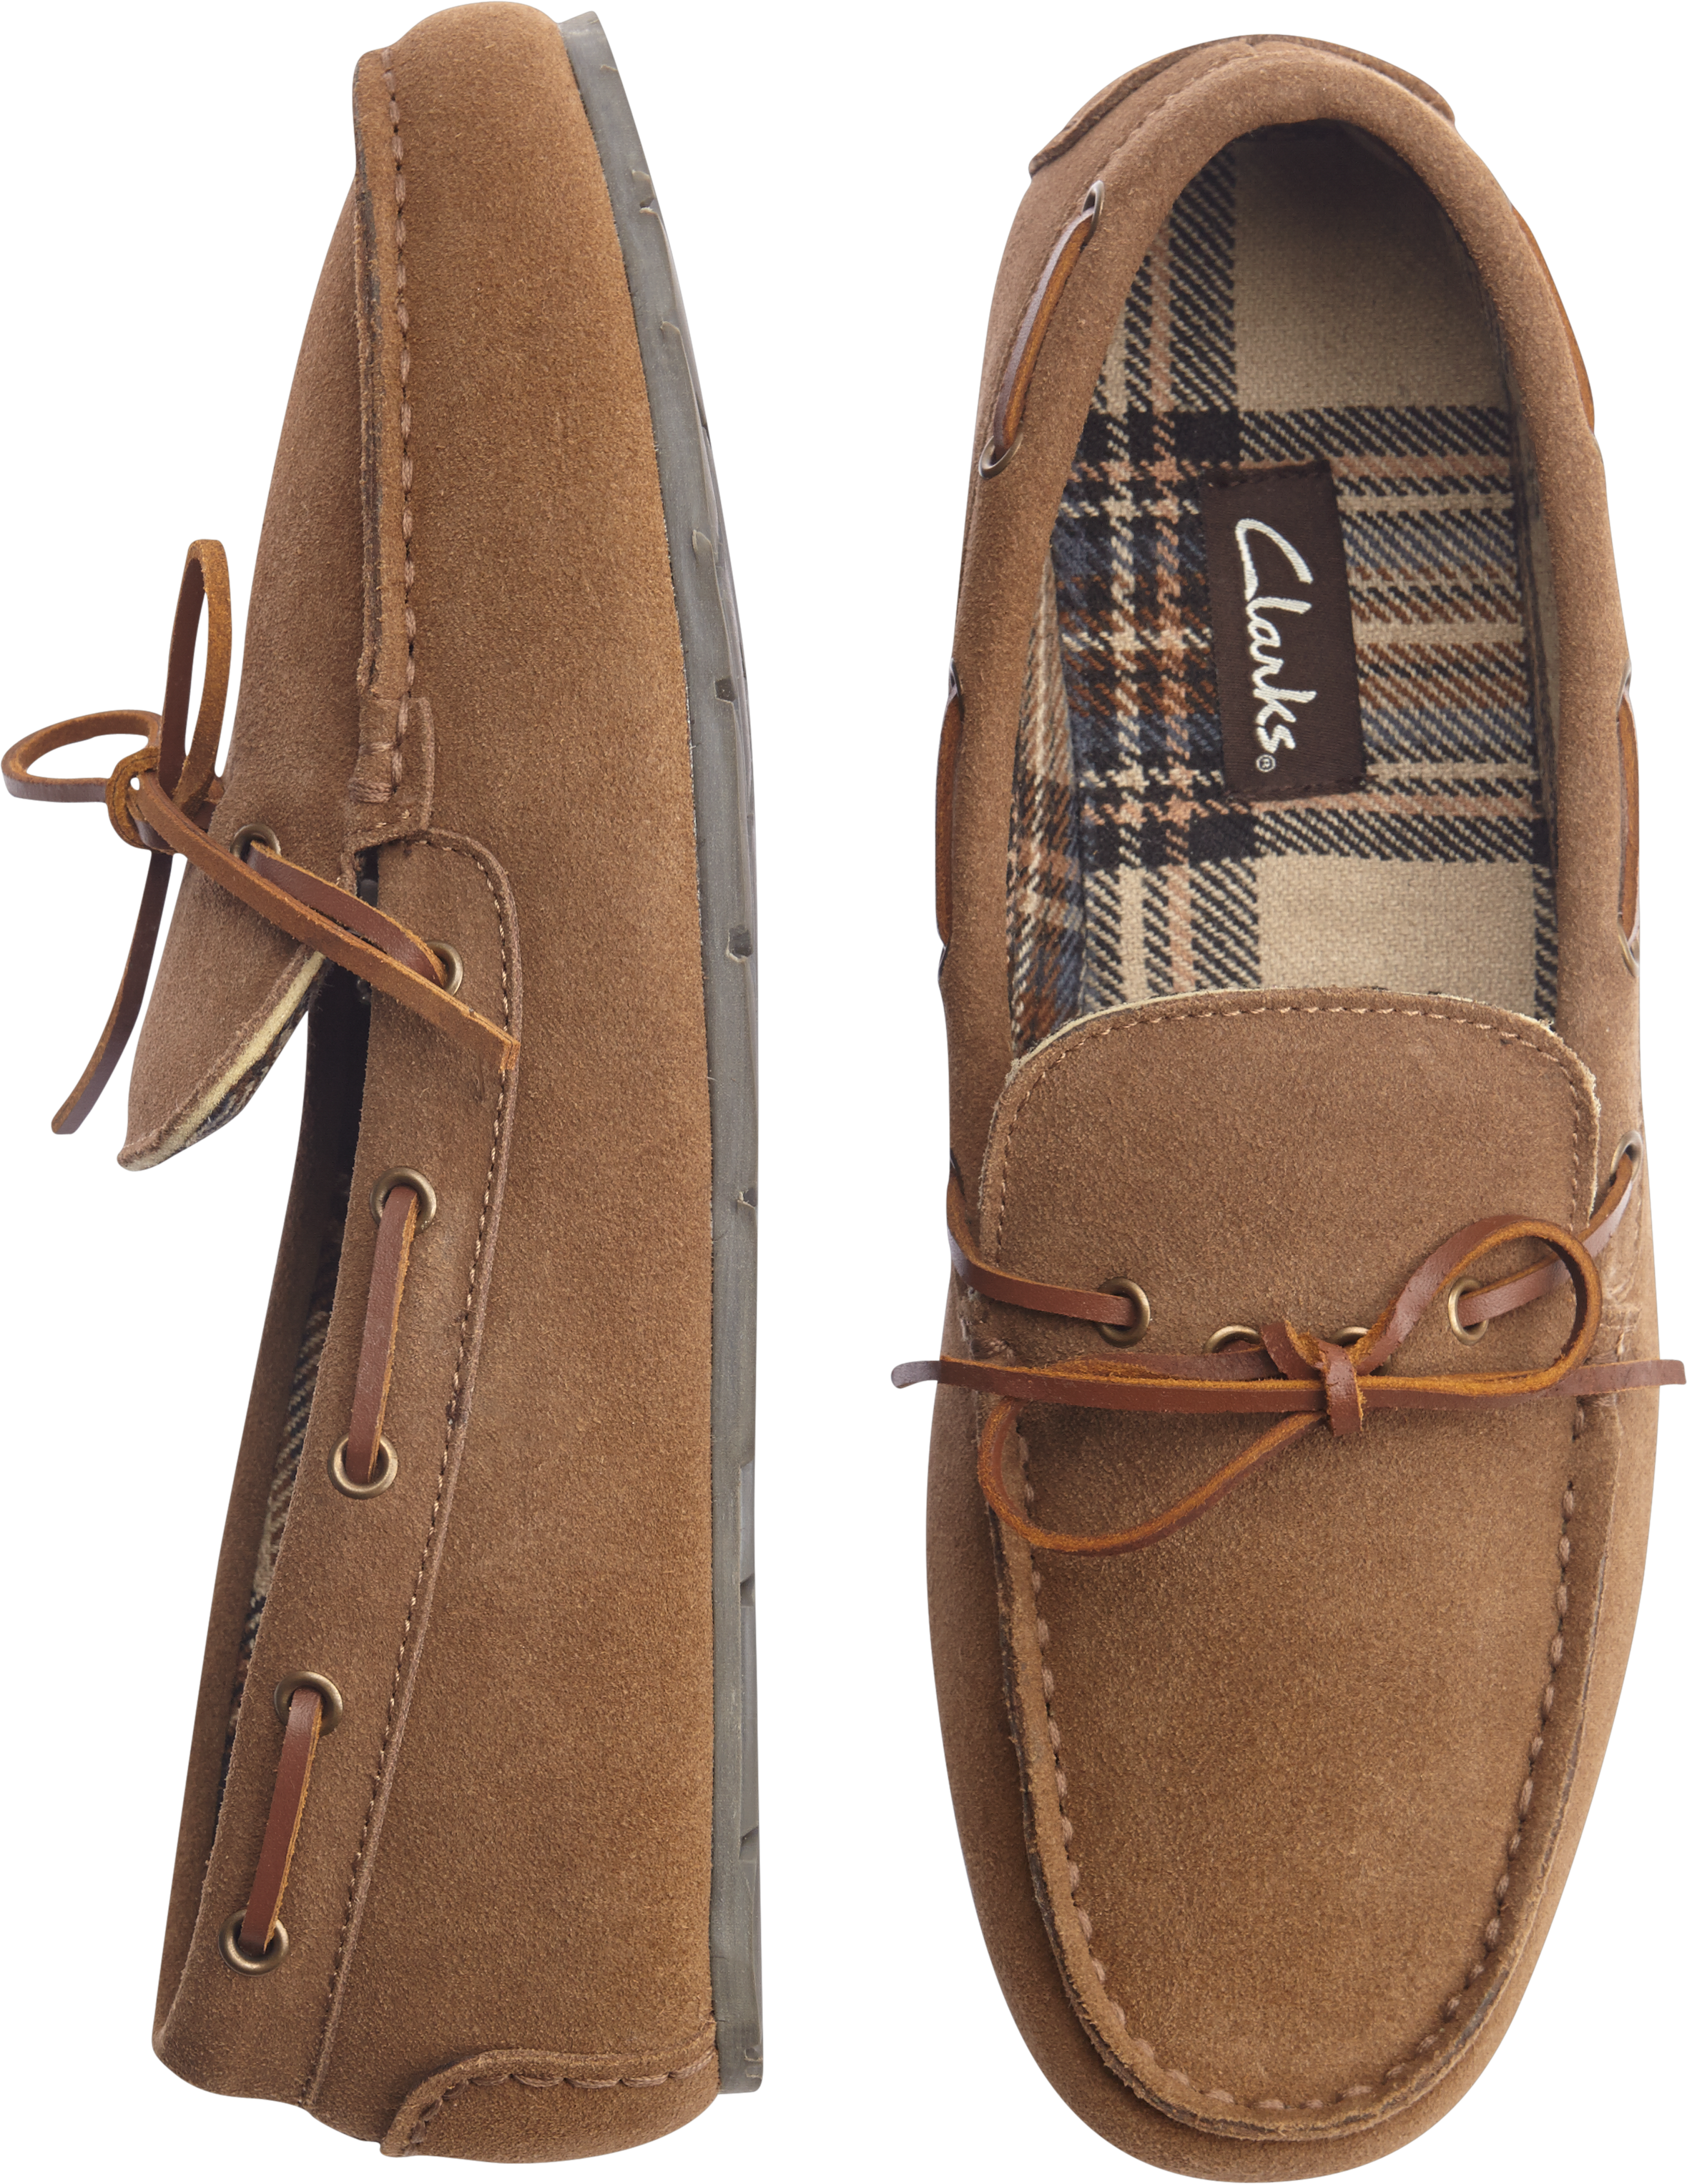 clarks suede moccasin slippers